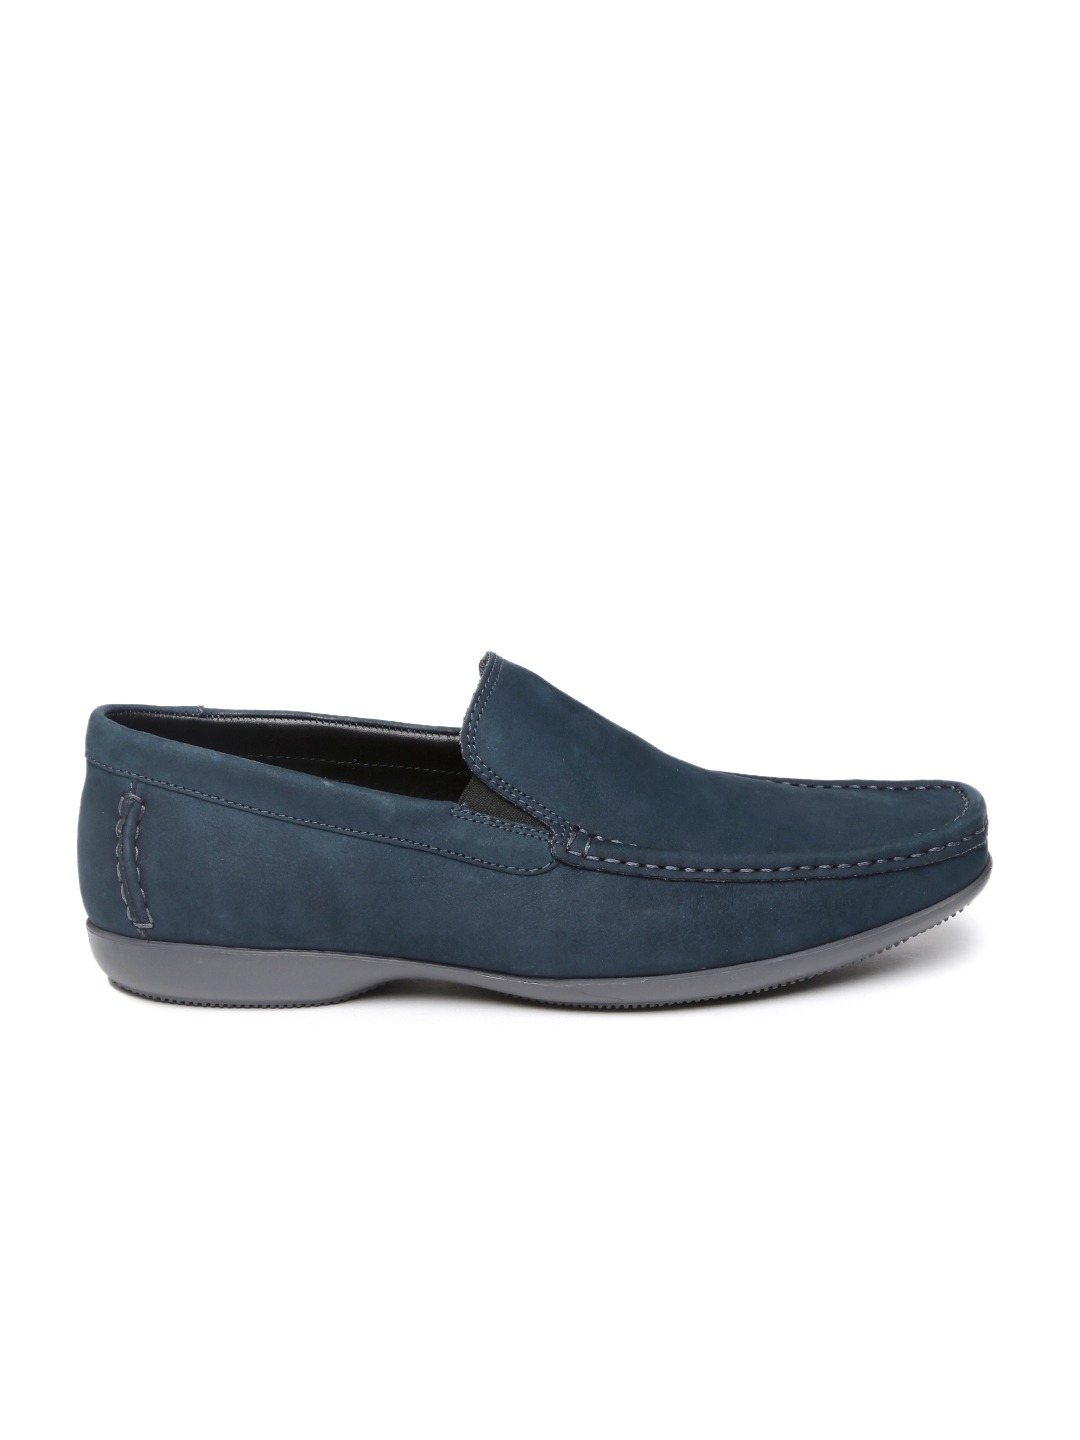 Buy Clarks Men Blue Suede Leather Loafers - Casual Shoes for Men ...